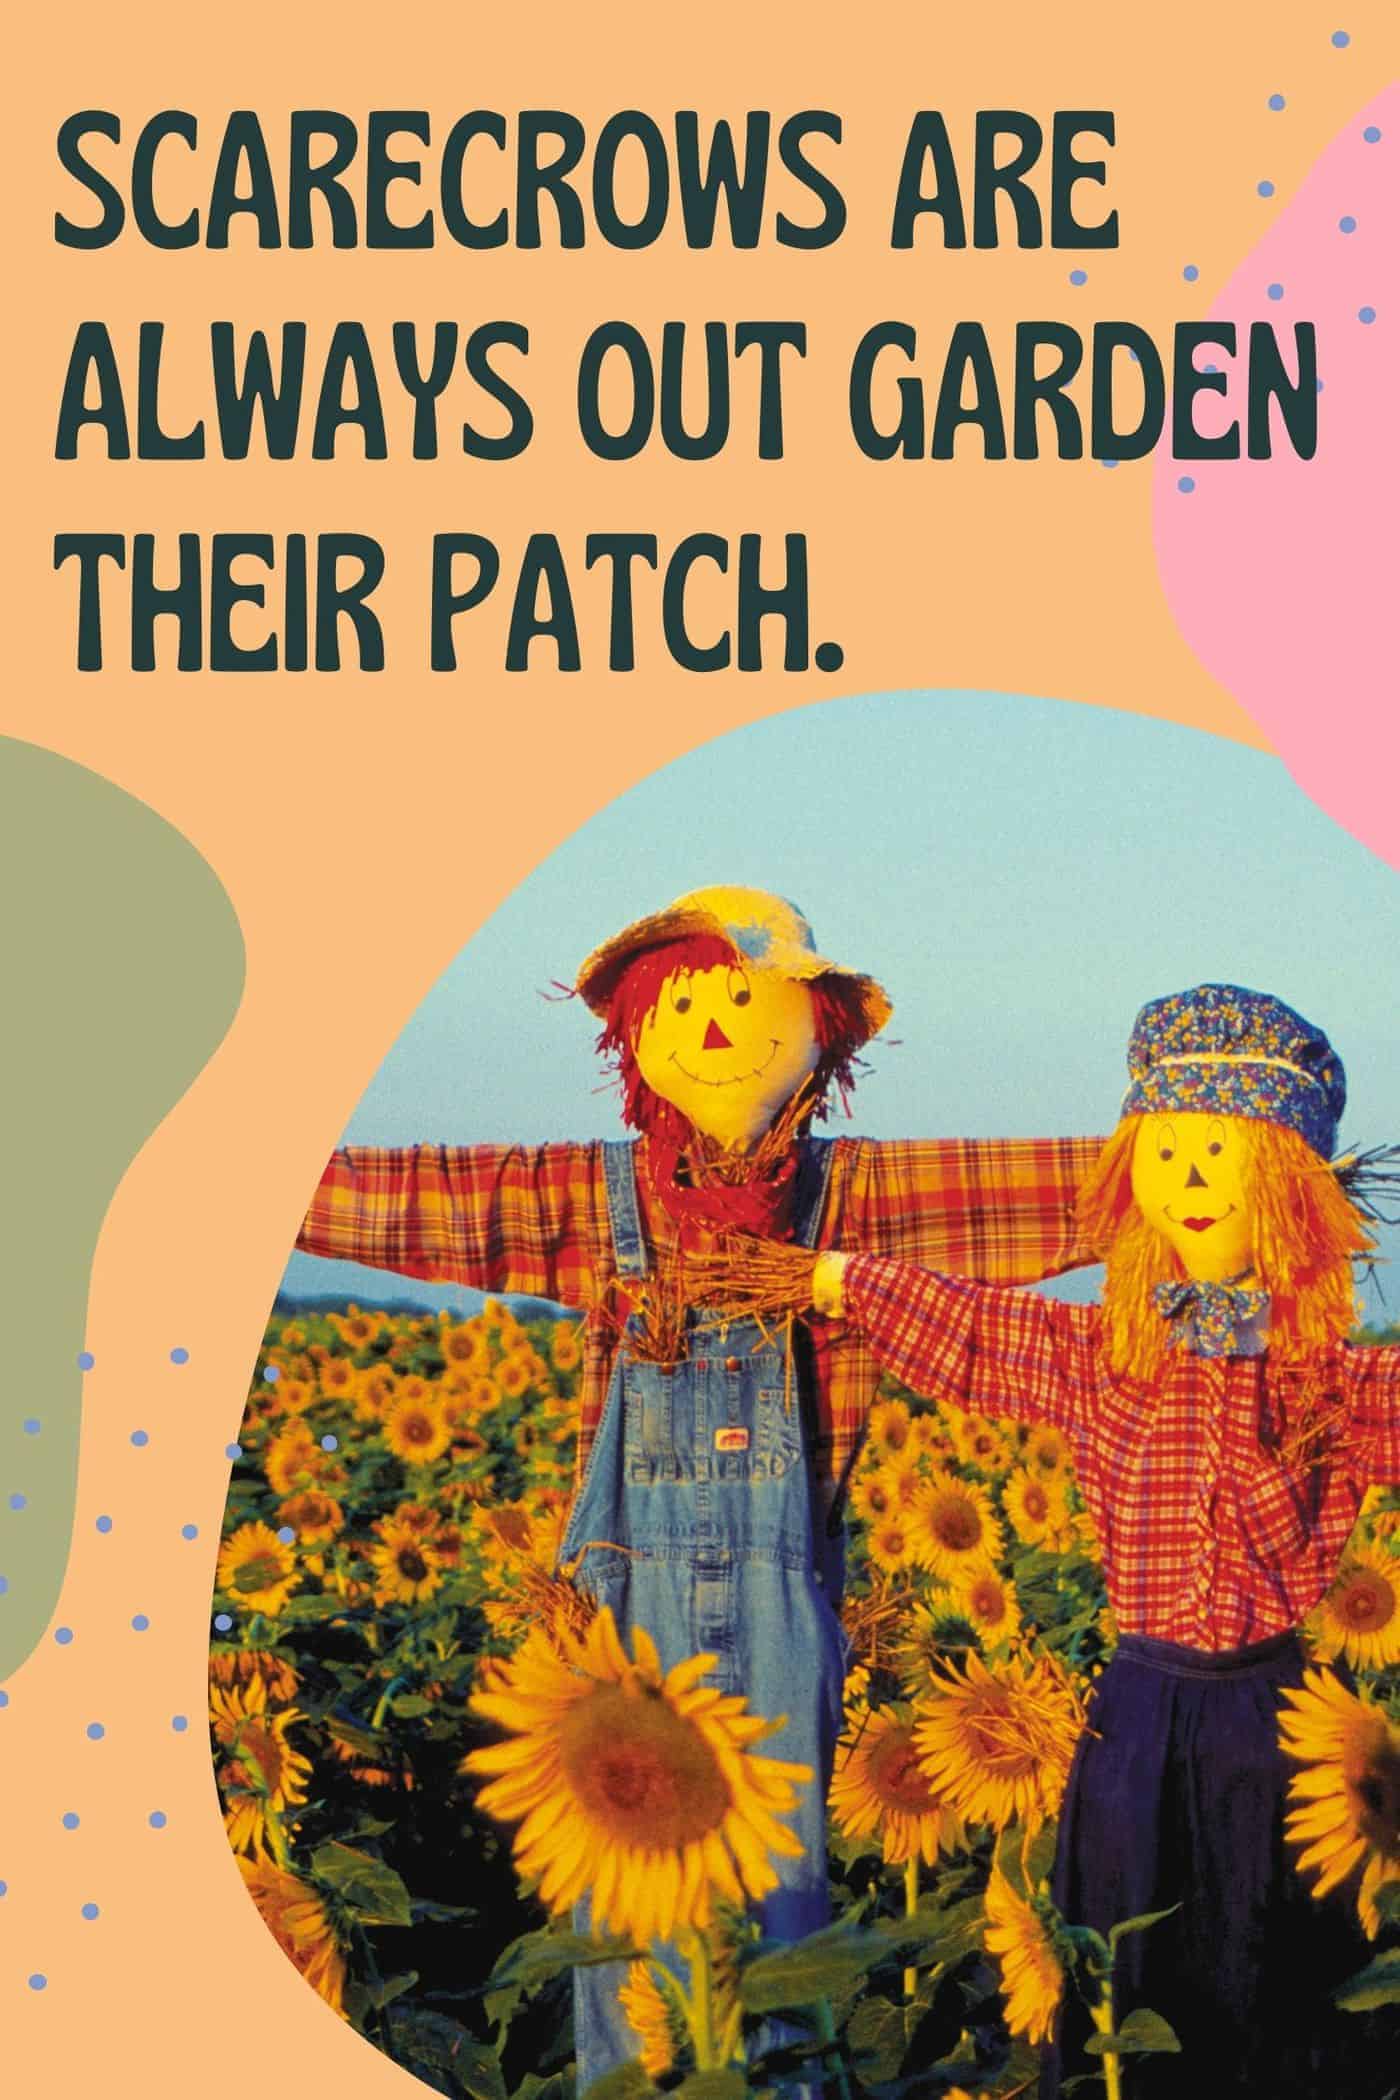 Scarecrows are always out garden their patch